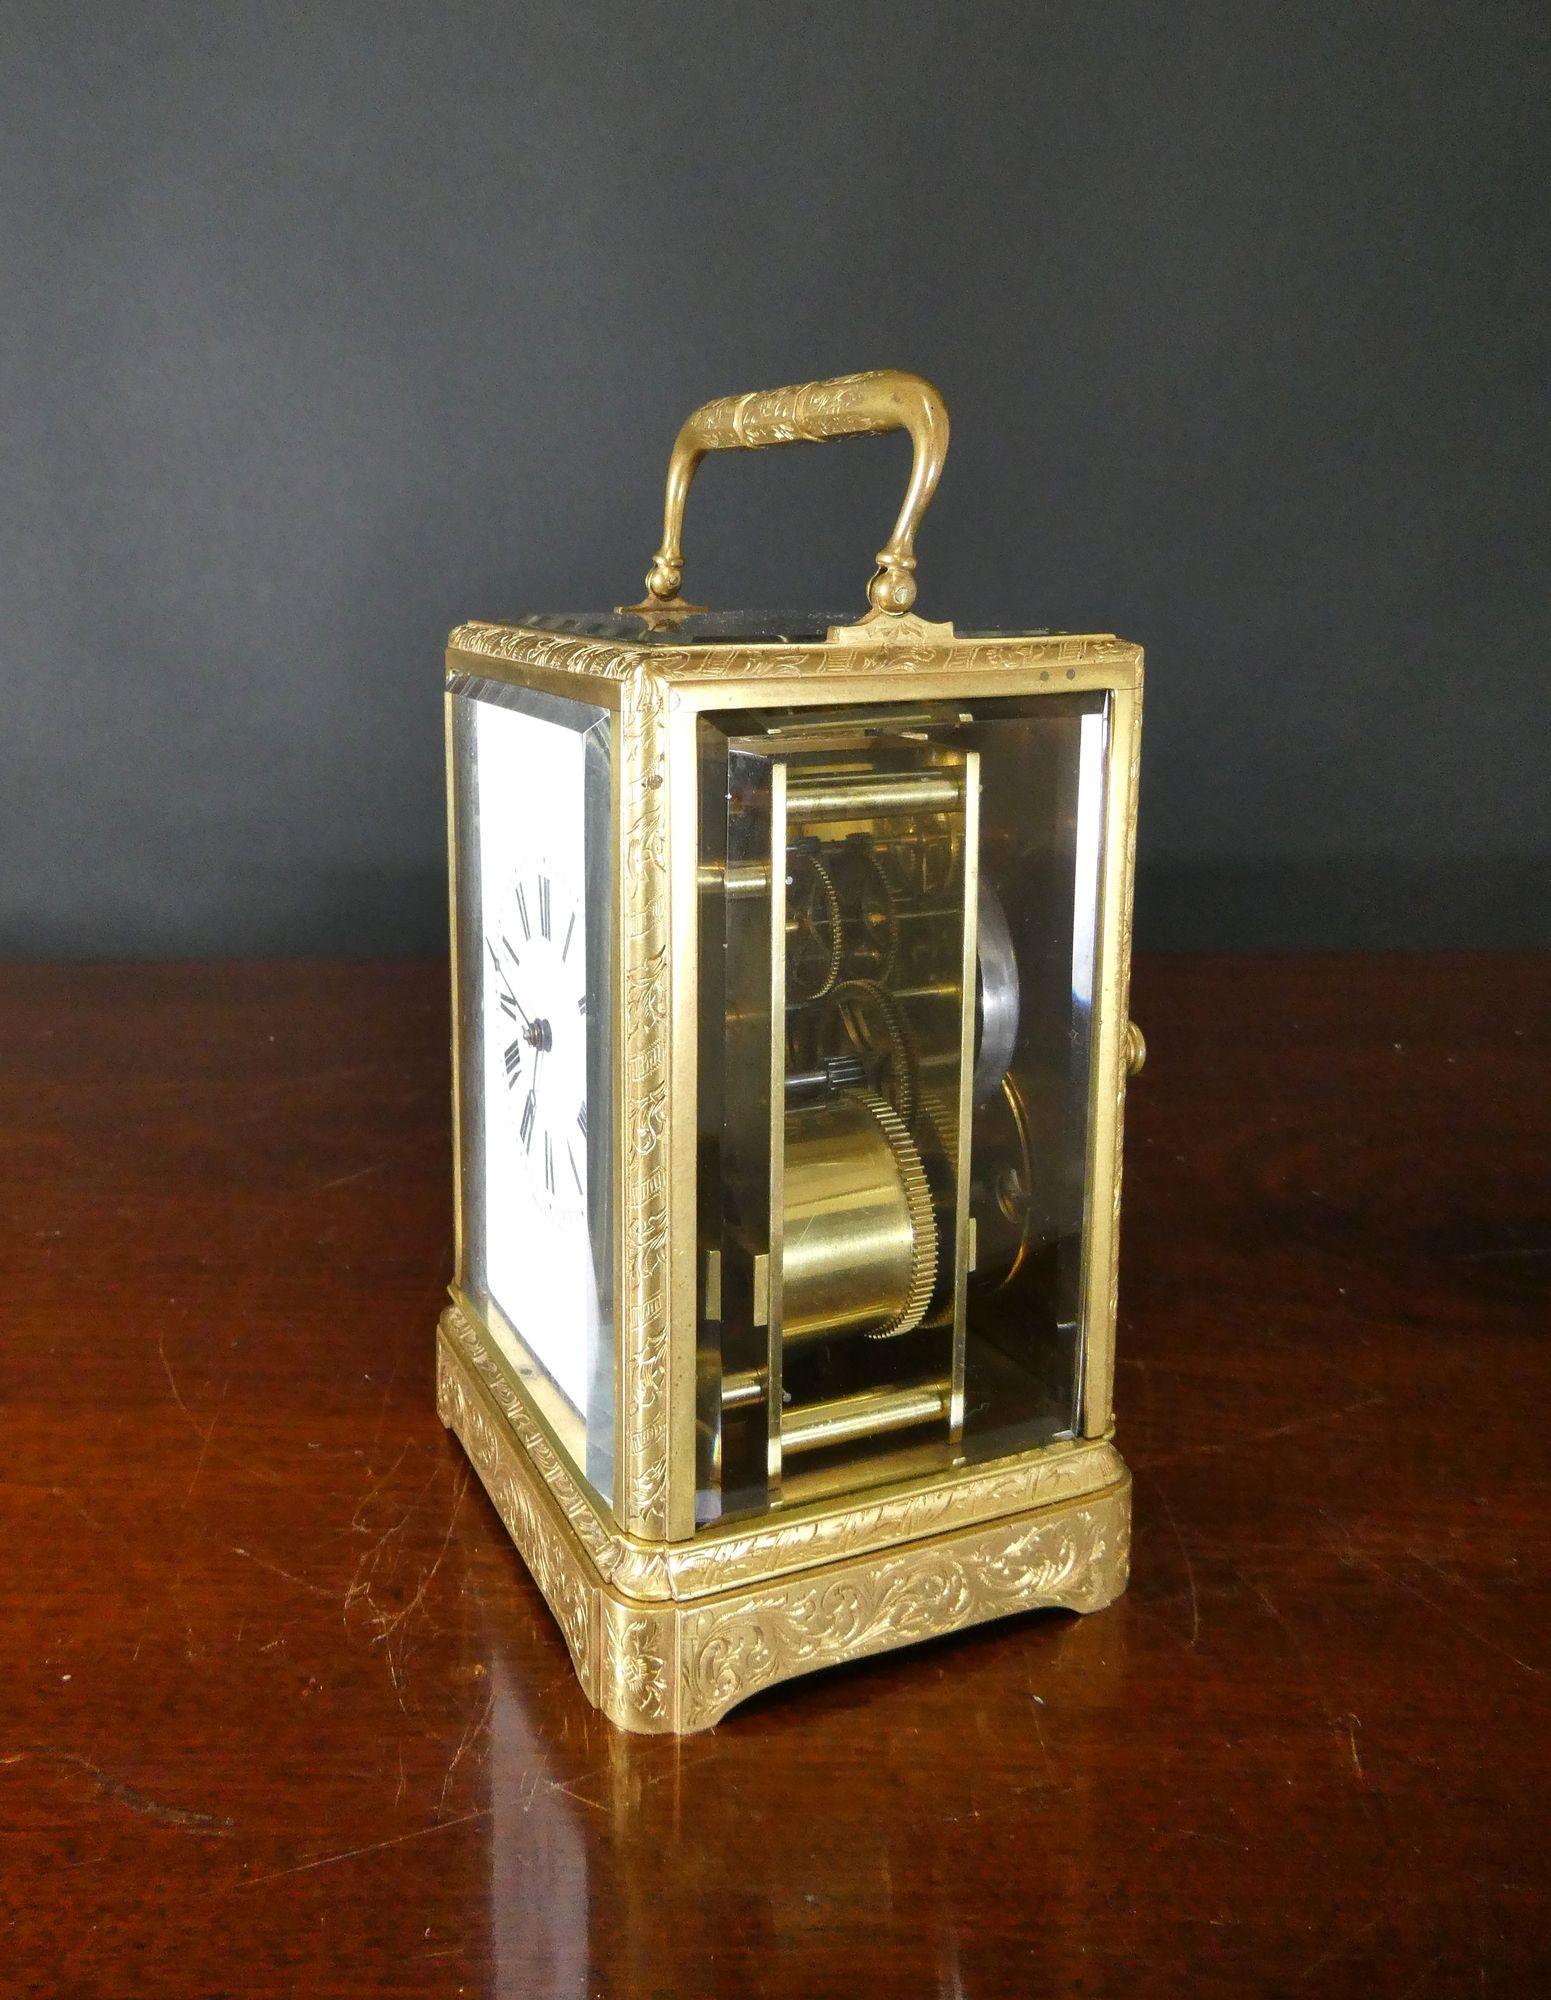 Fine Engraved Striking Carriage Clock by Bolviller In Good Condition For Sale In Norwich, GB